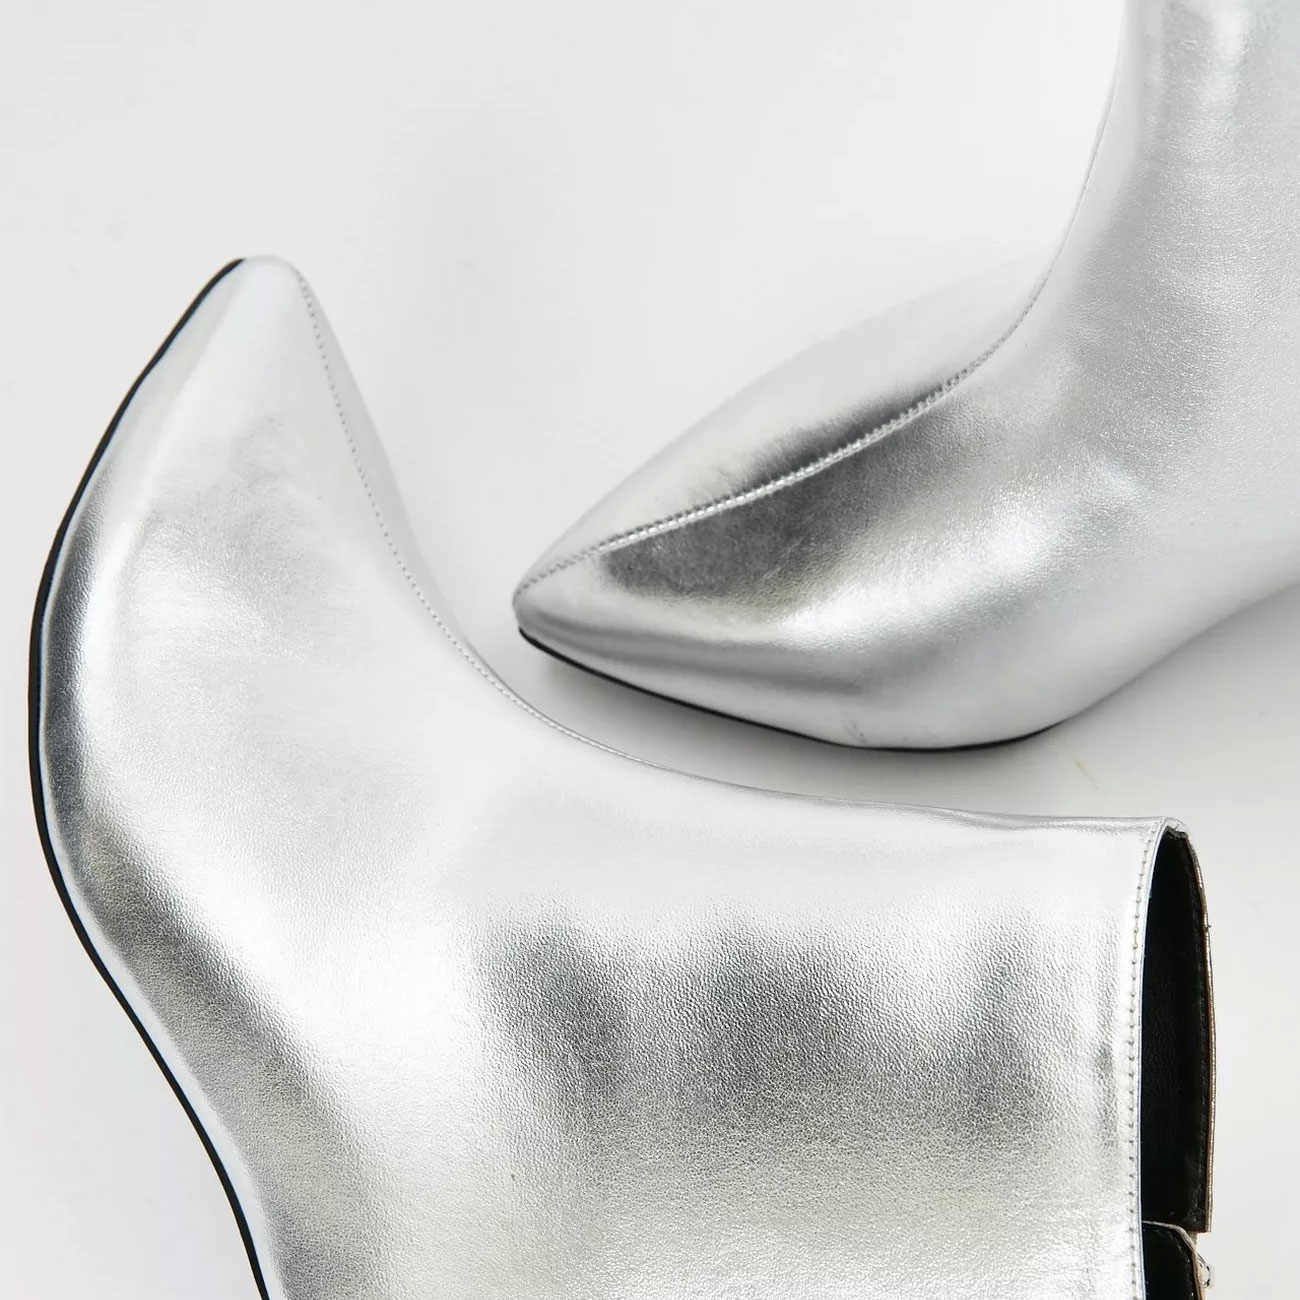 silver low heel ankle boots